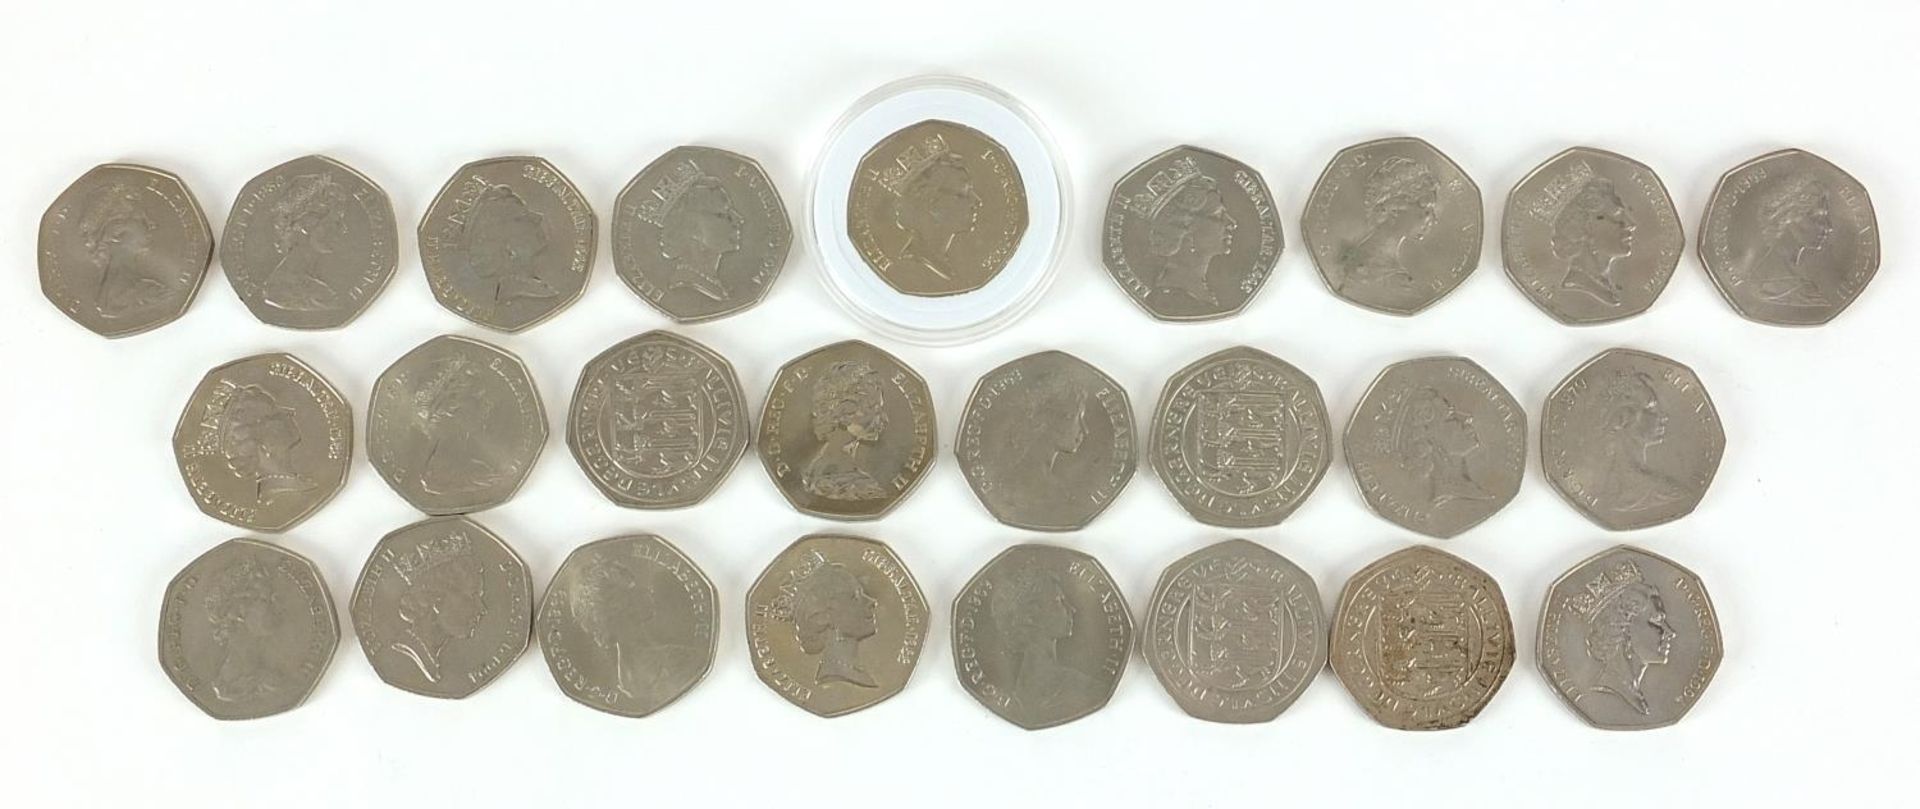 Selection of fifty pence pieces, various designs - Image 4 of 6